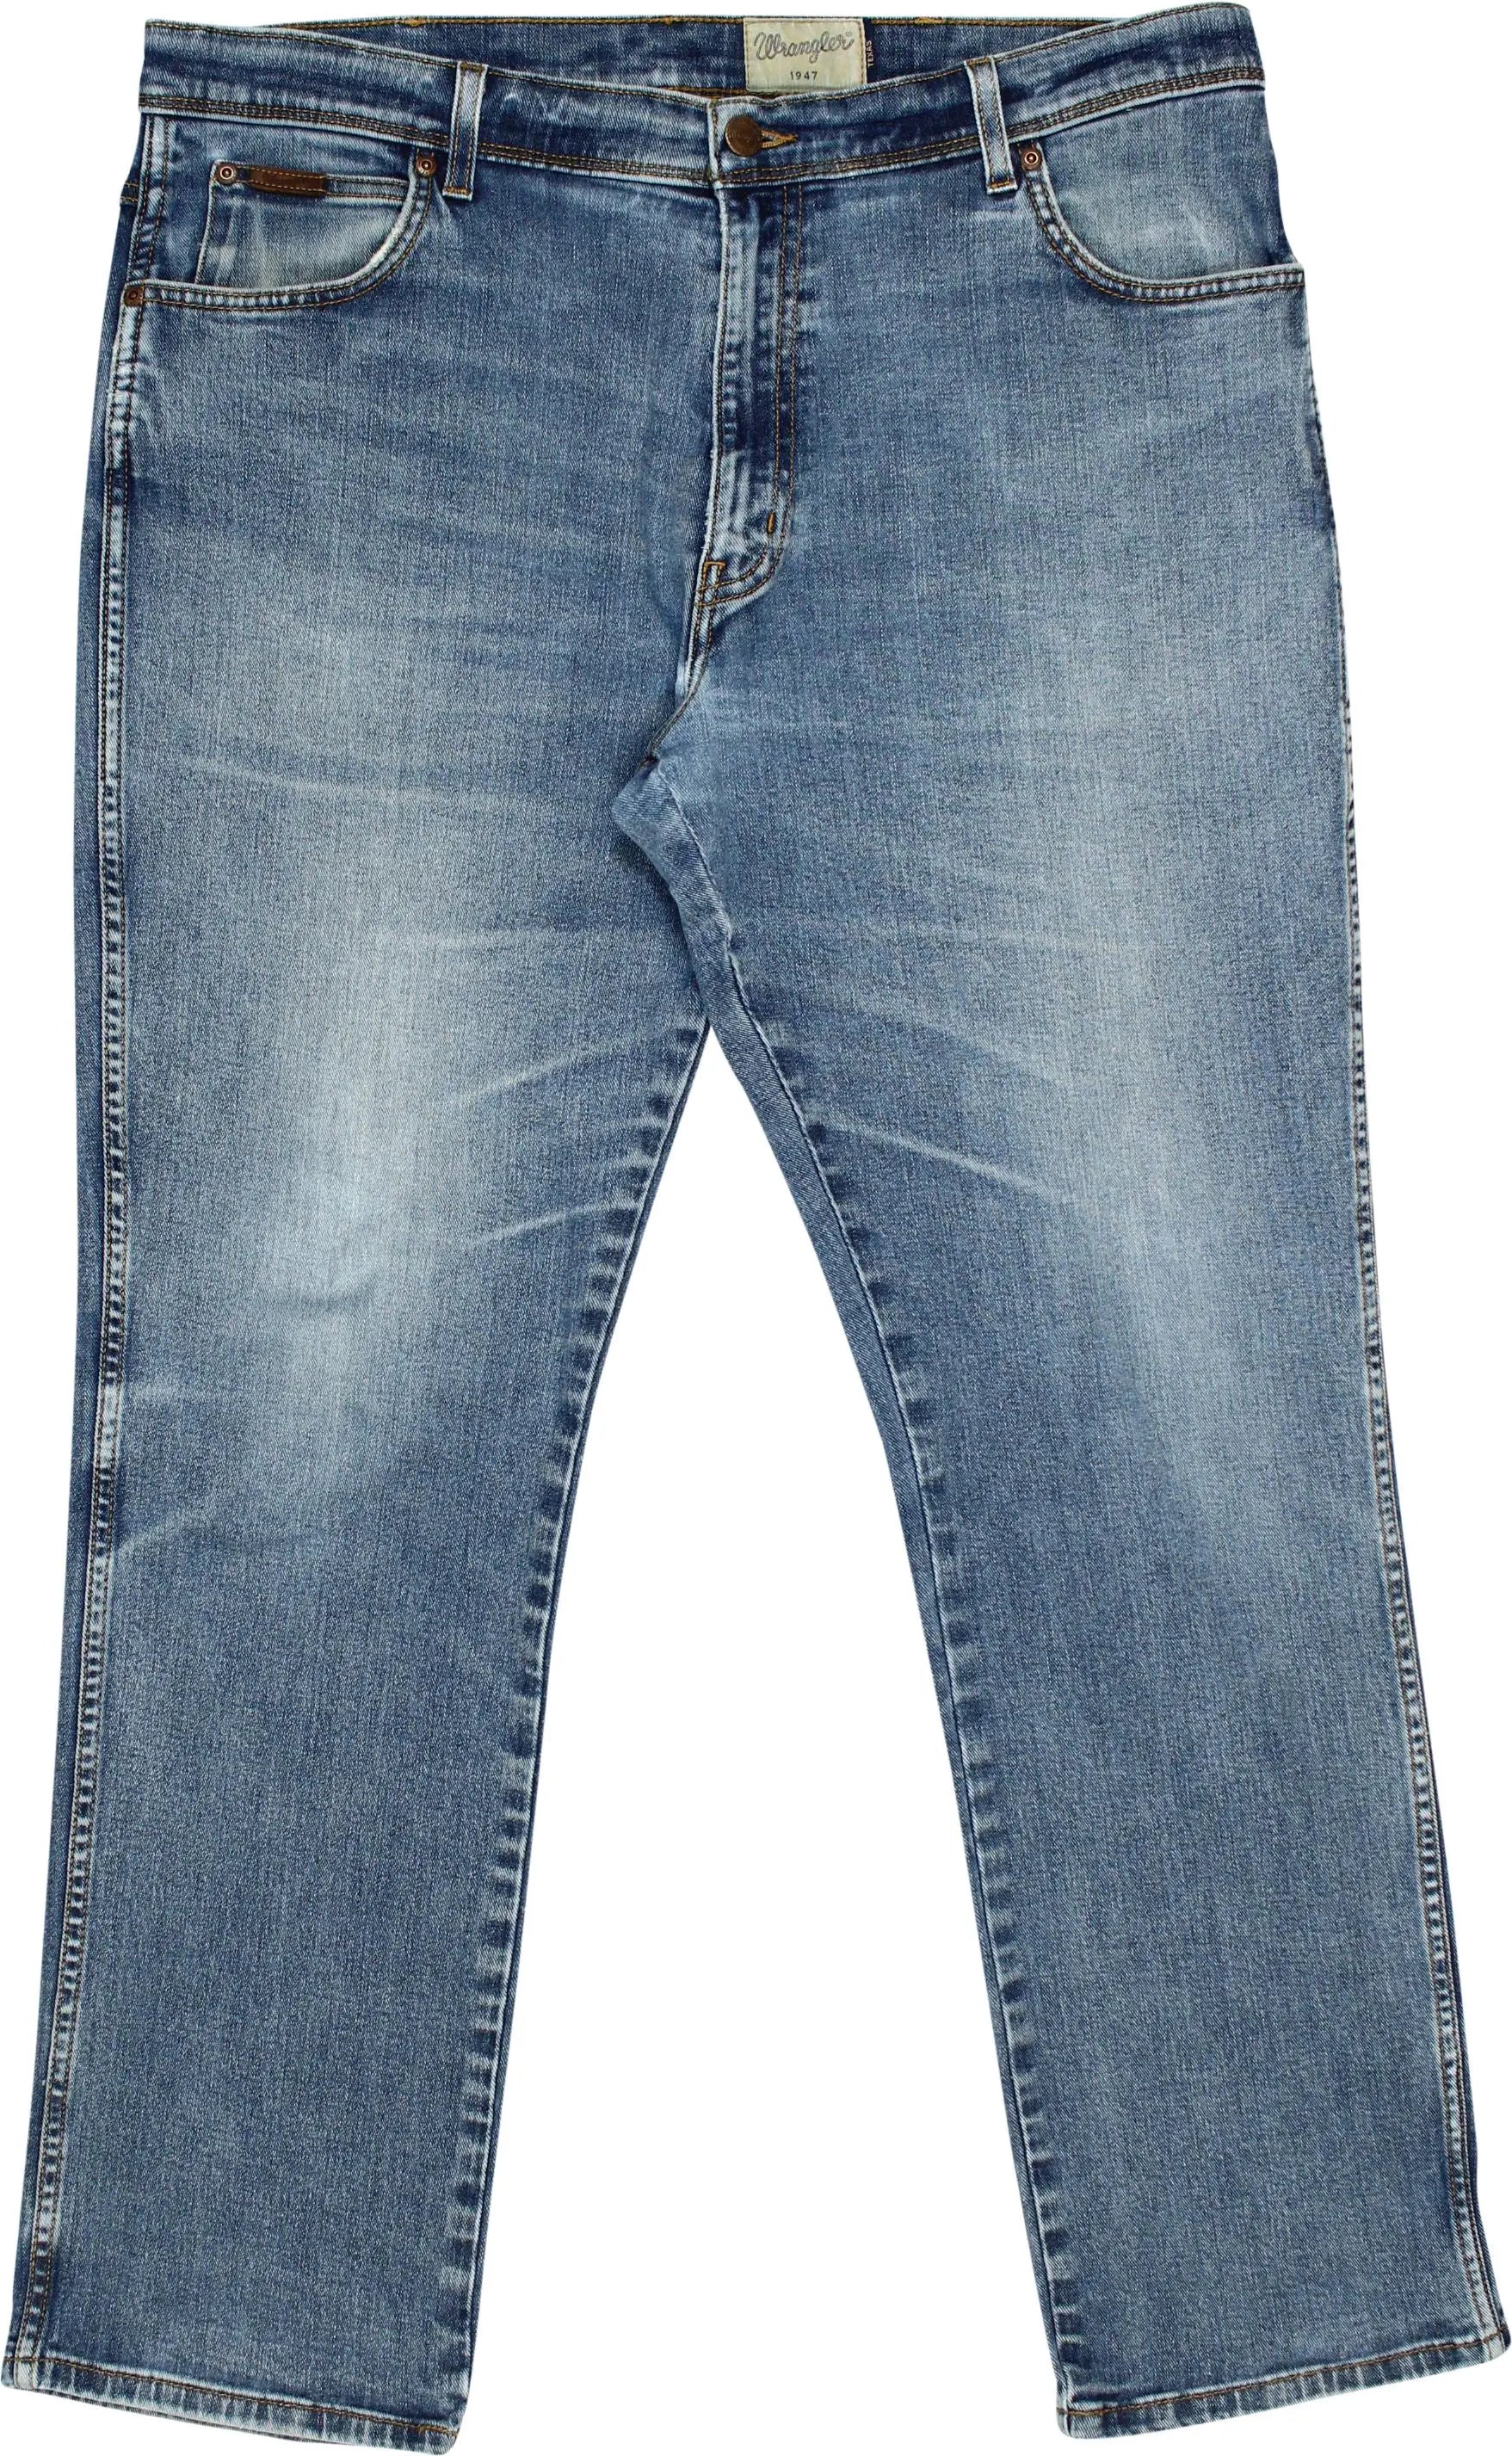 Wrangler - Texas Stretch Jeans by Wrangler- ThriftTale.com - Vintage and second handclothing